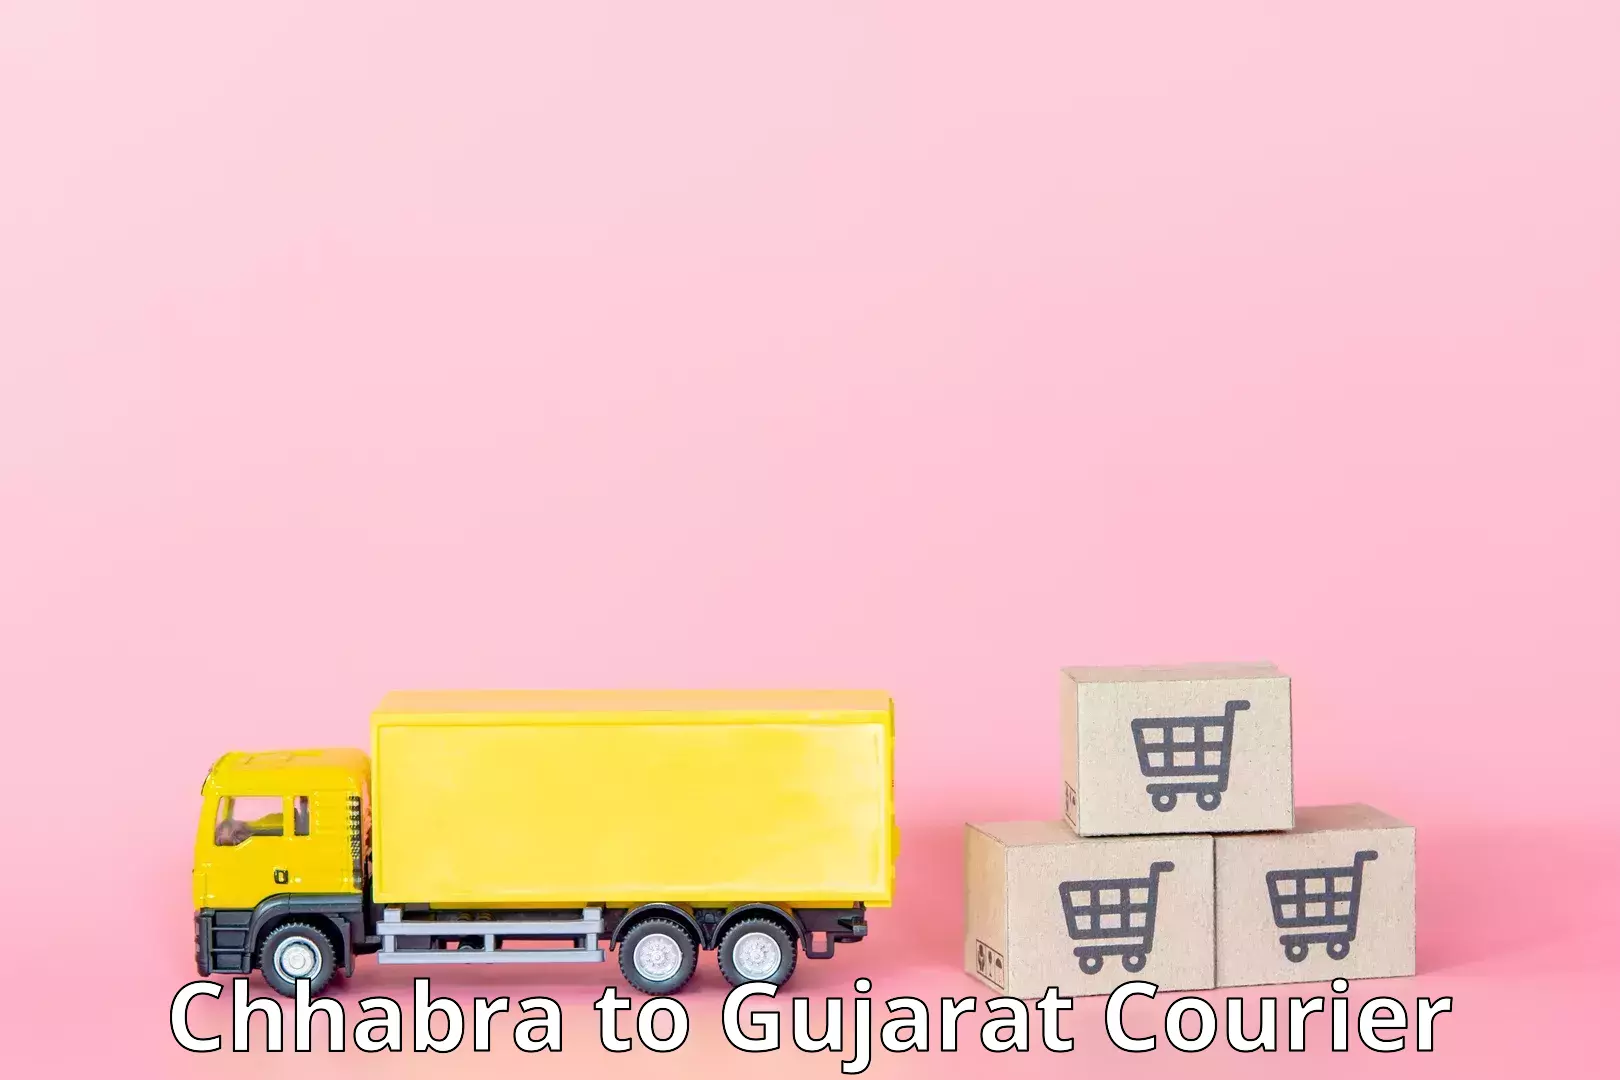 Delivery service partnership in Chhabra to Gujarat